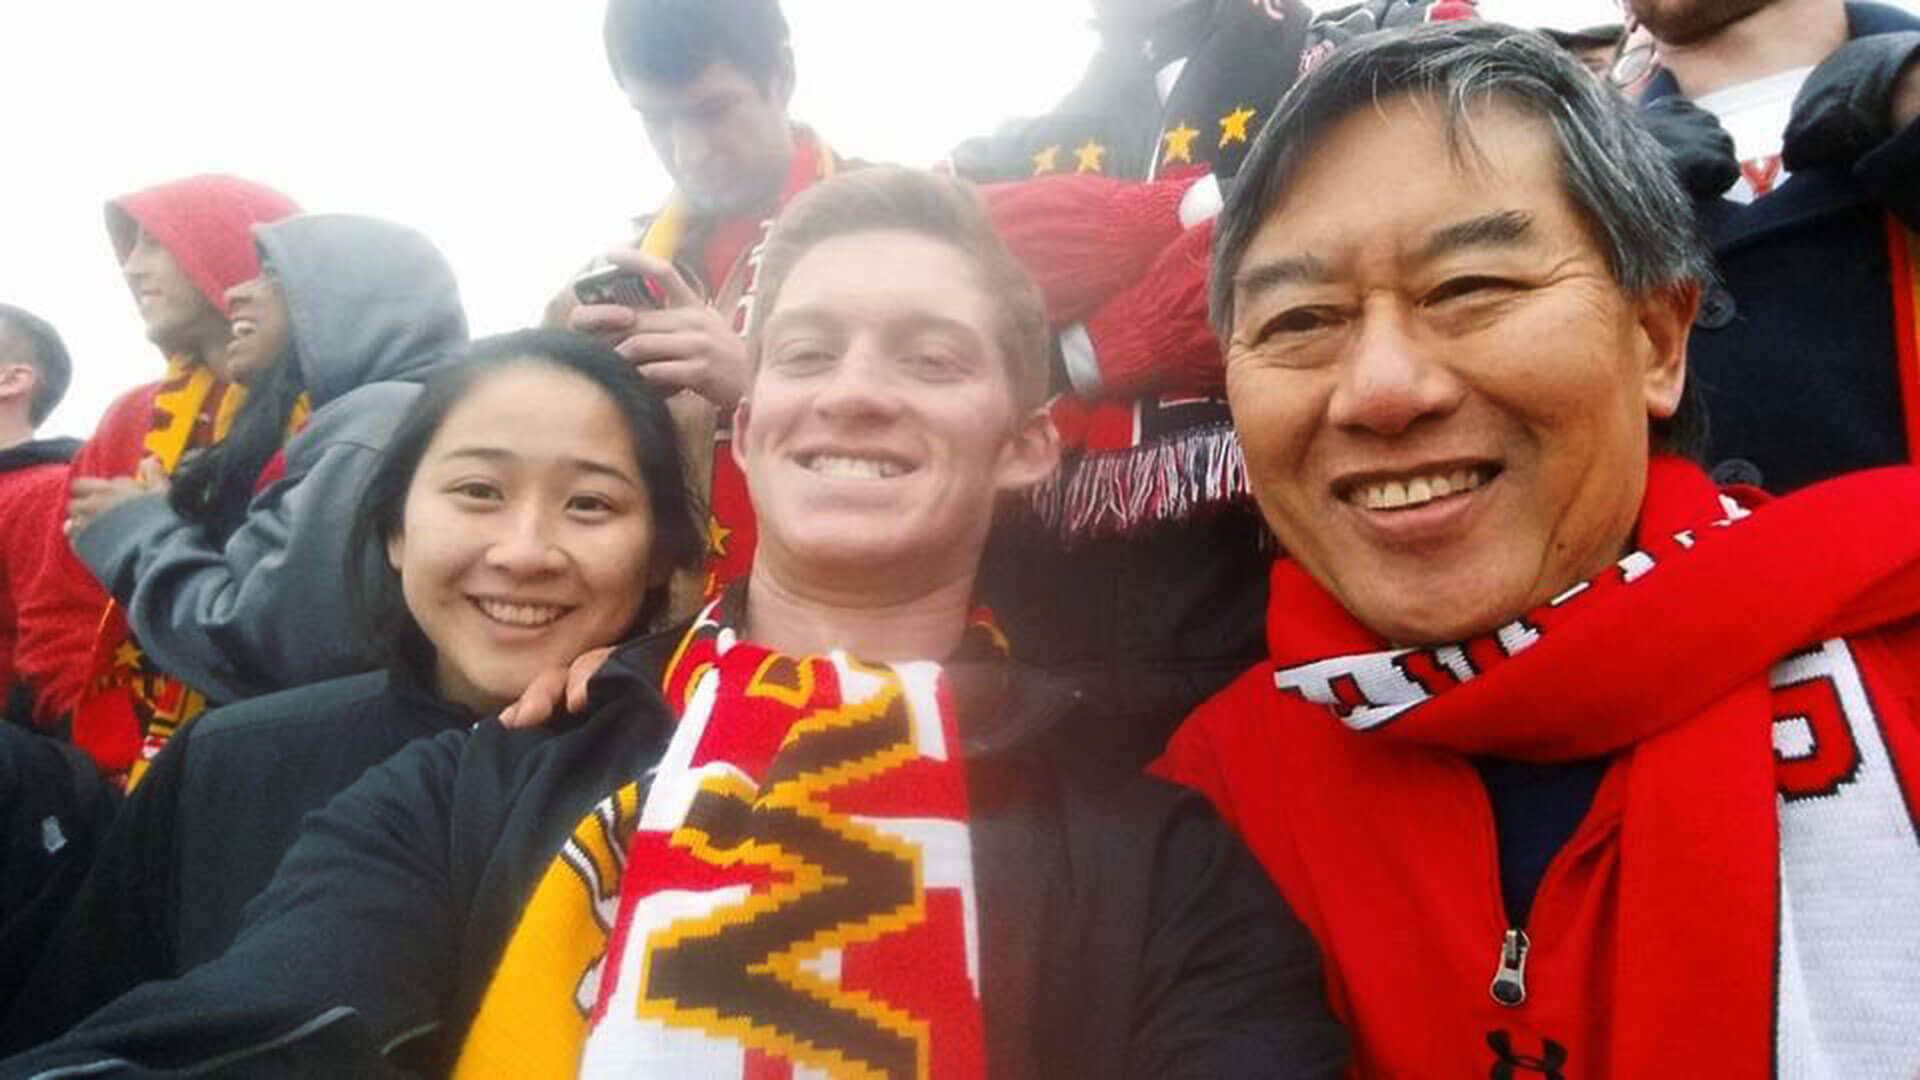 Sadie Lynch, Daniel Callow and President Loh at a UMD soccer game